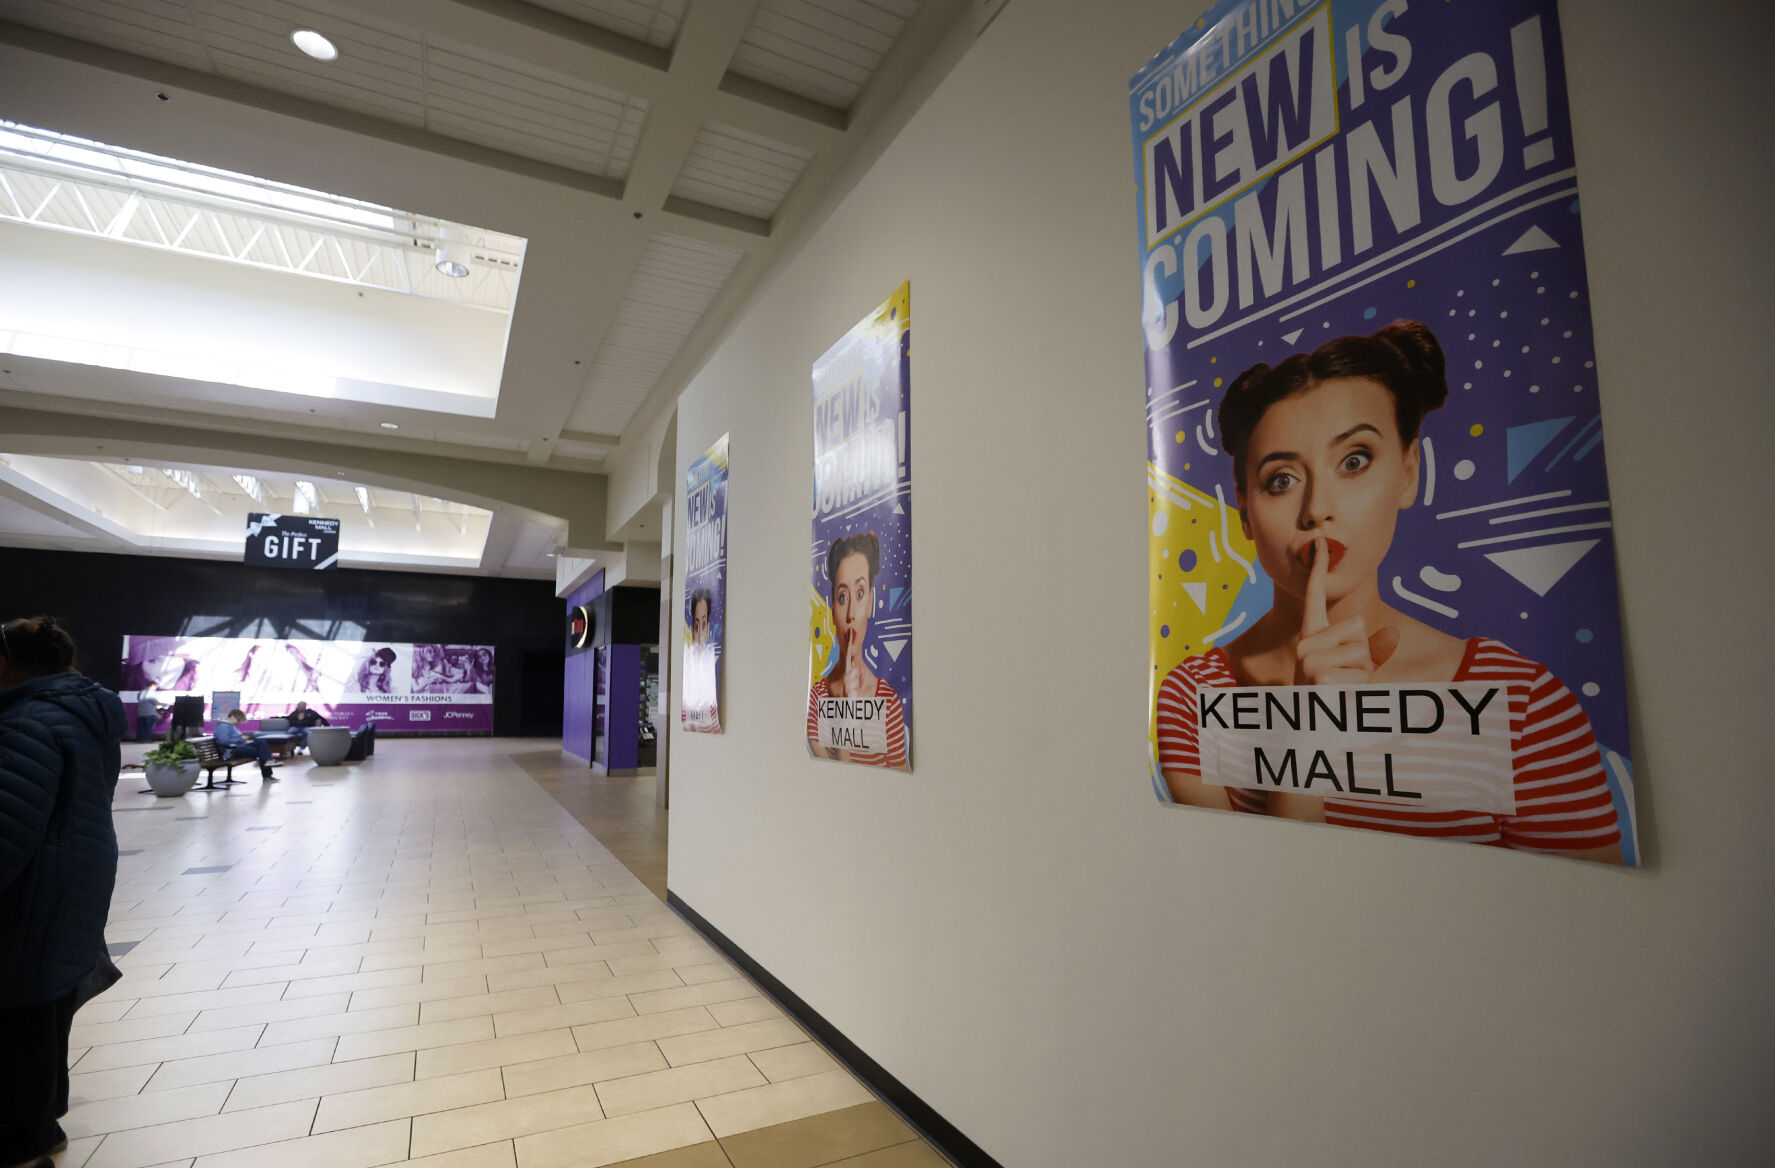 Signs are displayed at Kennedy Mall in Dubuque on Monday, Feb. 20, 2023. A remodel has begun at the former Younkers women